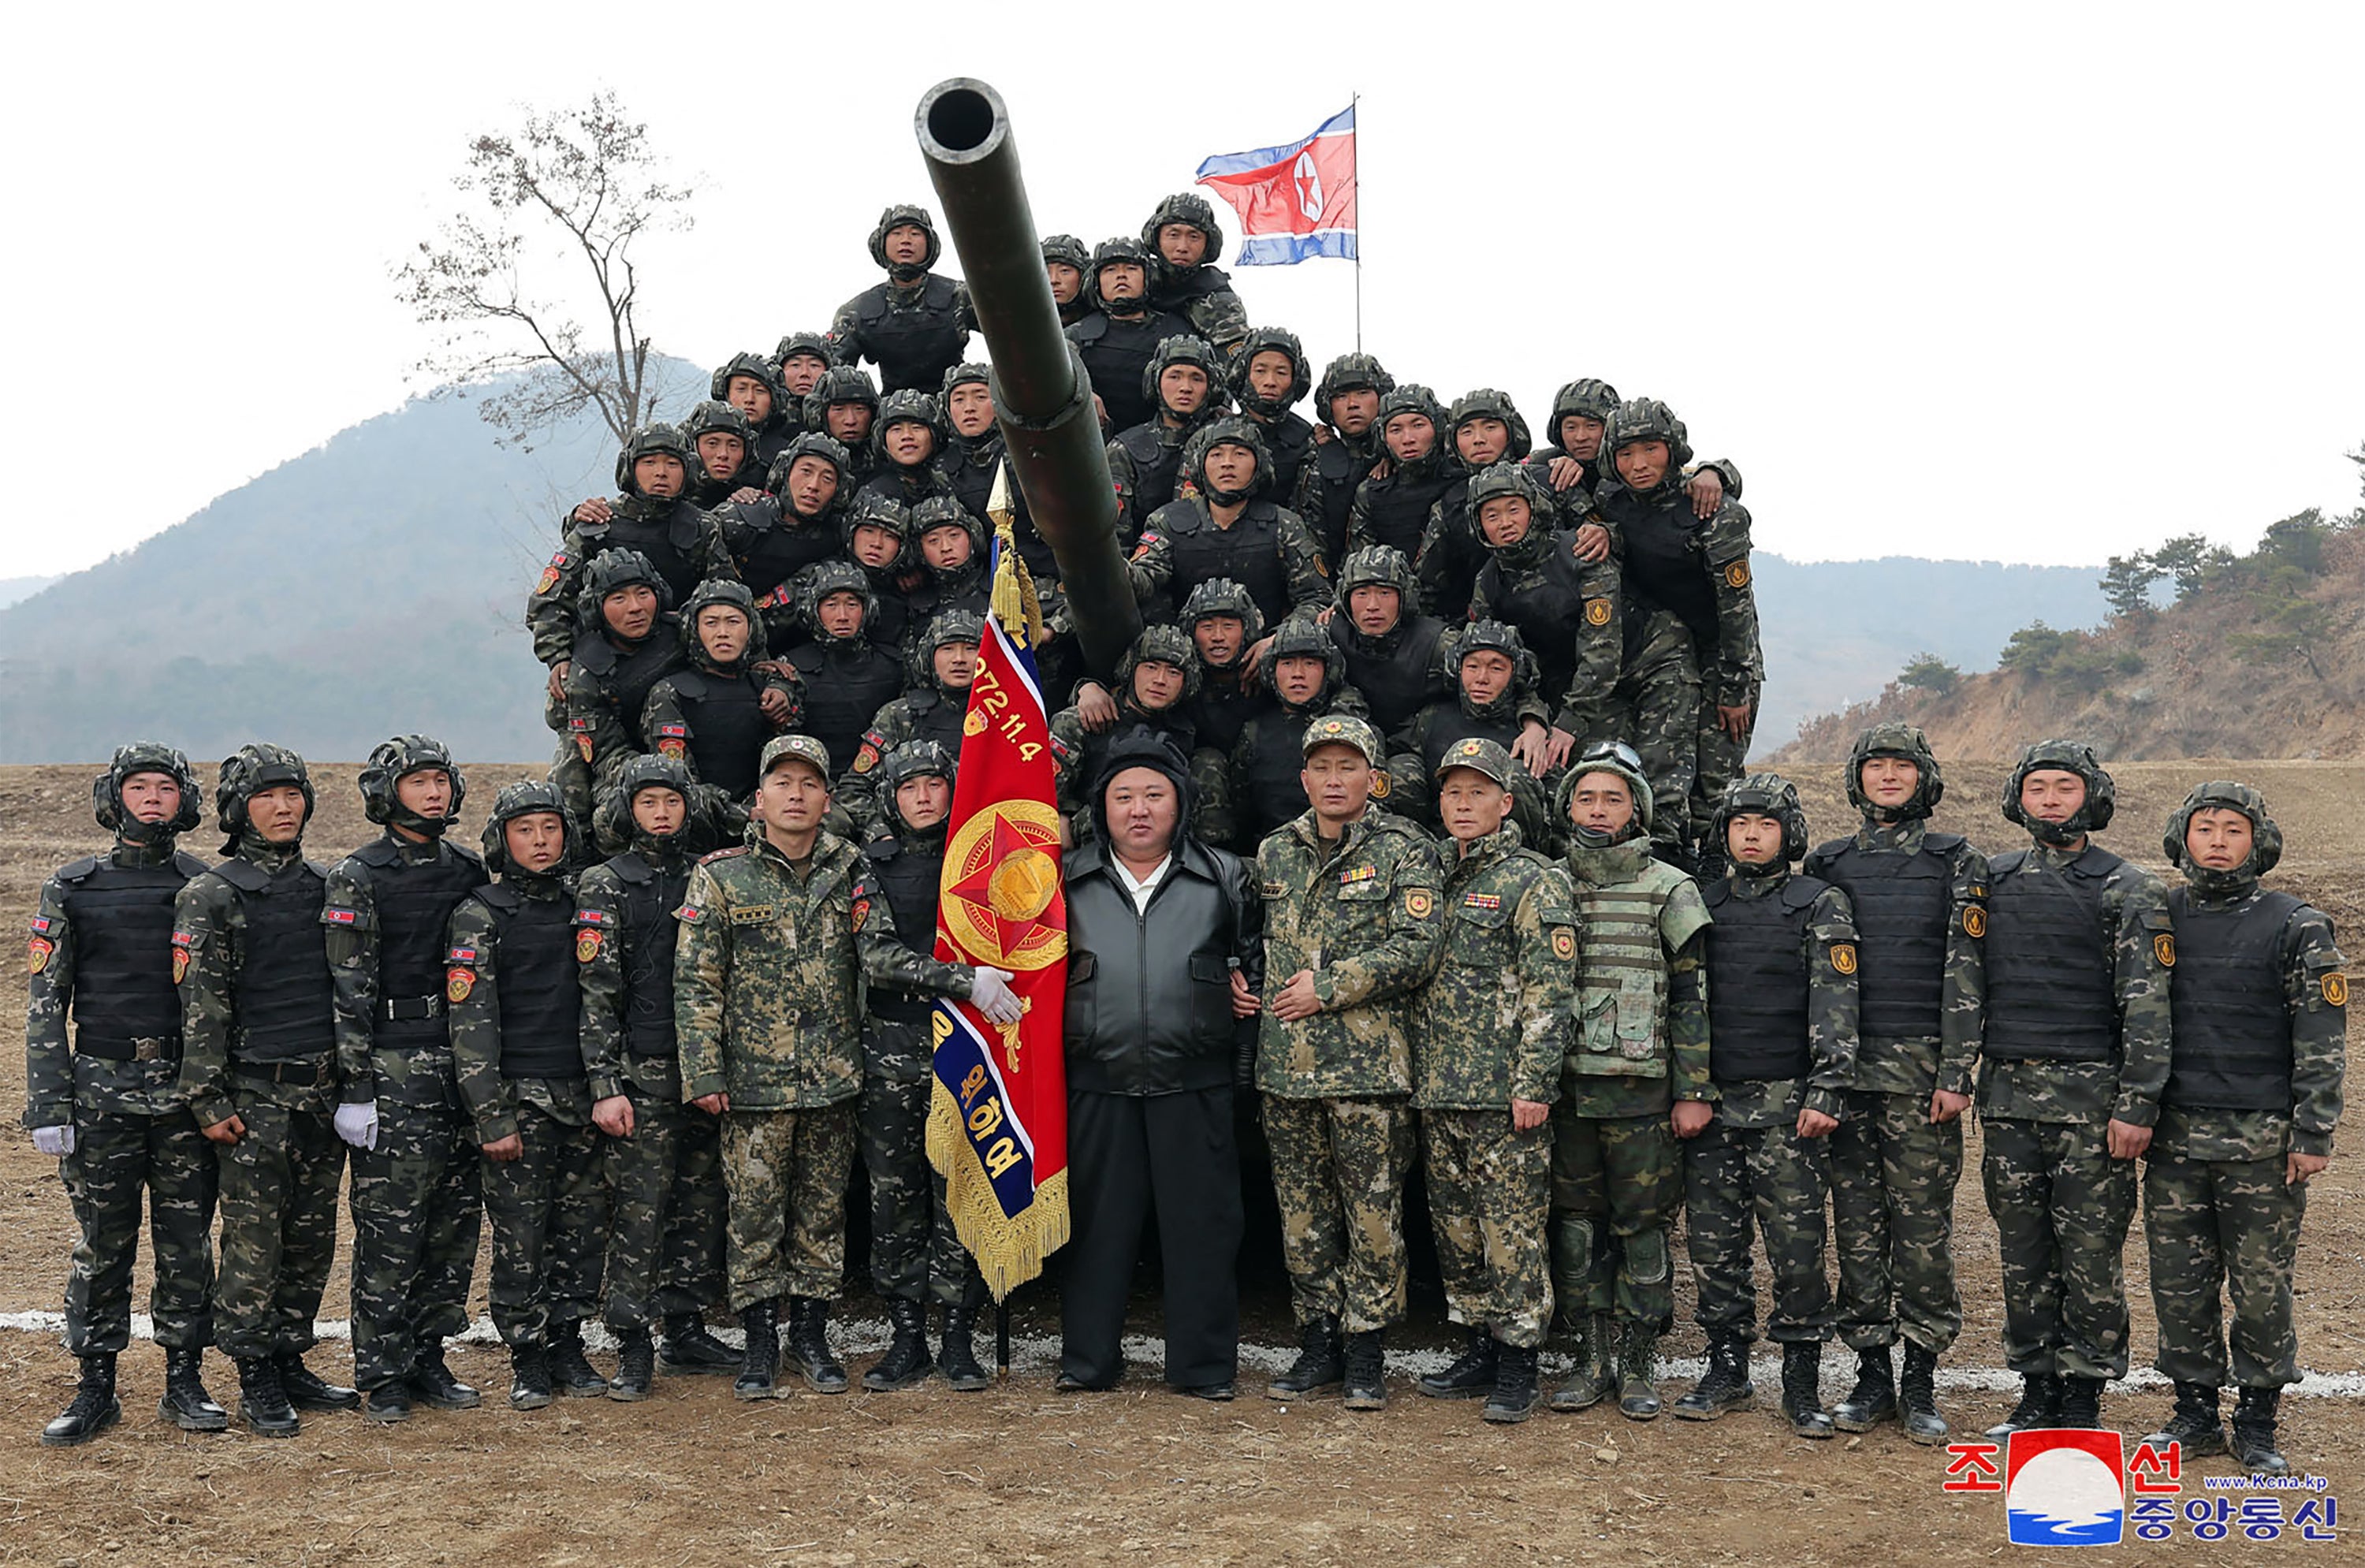 North Korean leader Kim Jong Un (C) posing with personnel during a training competition between the combined forces of the Korean People’s Army tank crews at an undisclosed location in North Korea